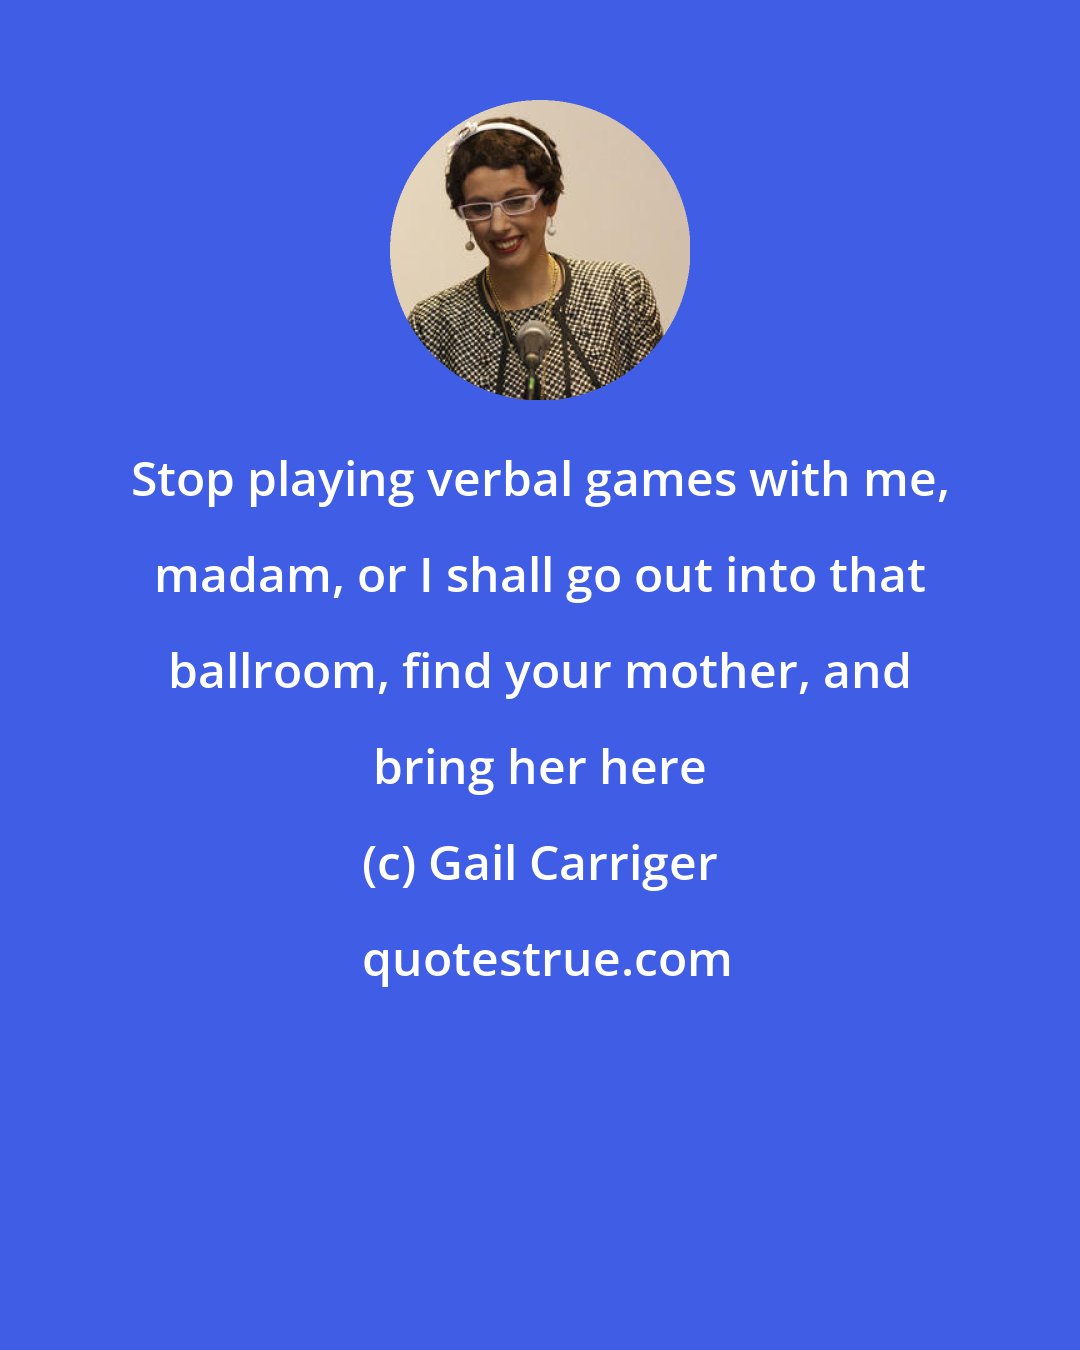 Gail Carriger: Stop playing verbal games with me, madam, or I shall go out into that ballroom, find your mother, and bring her here